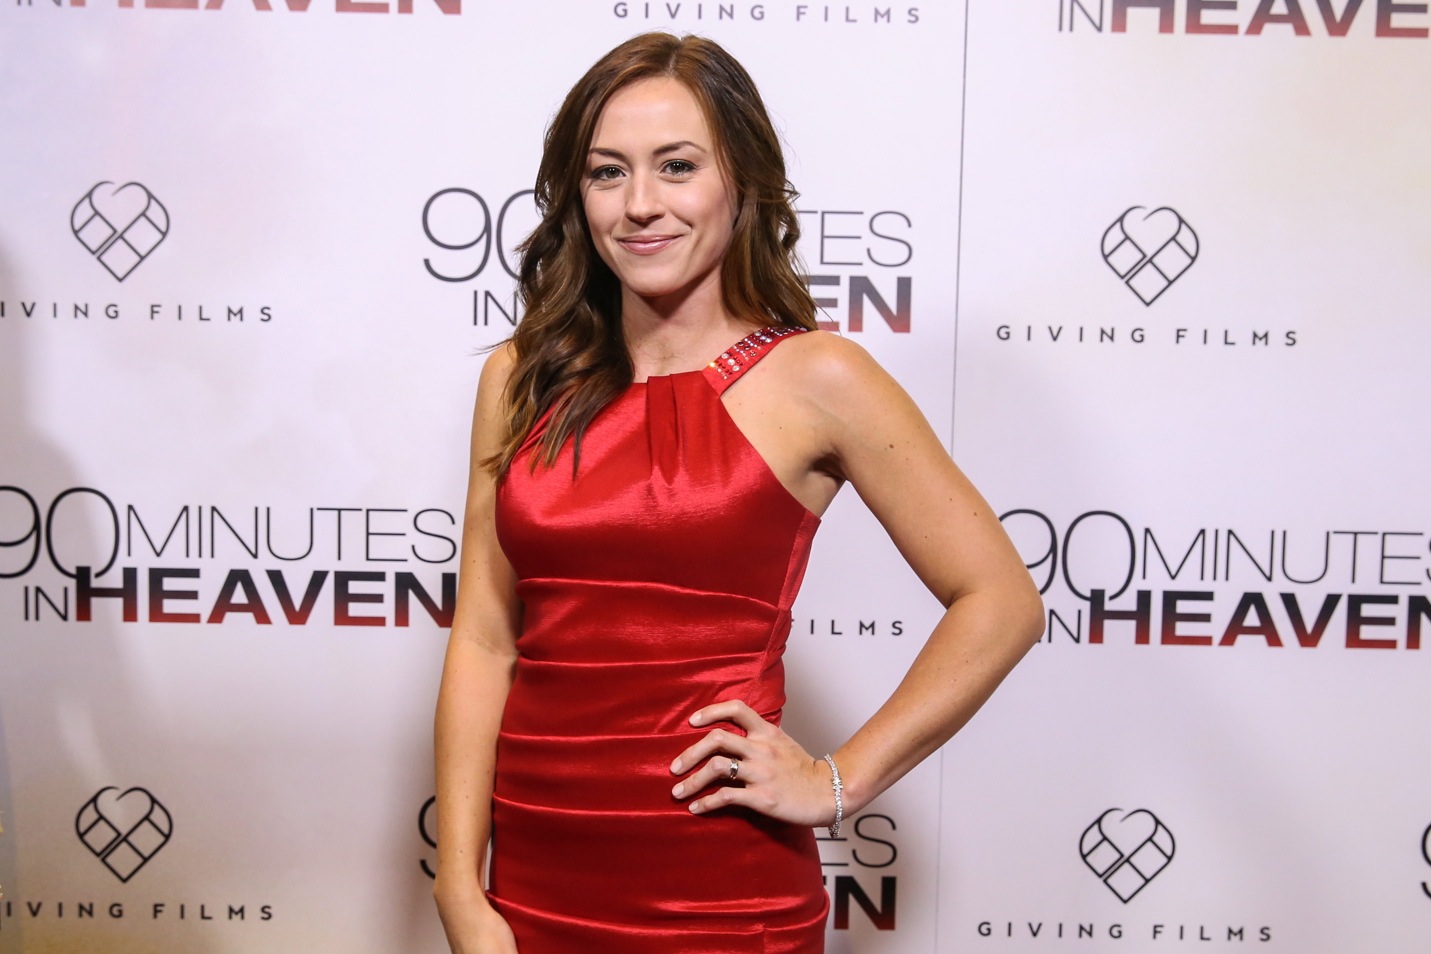 Ashley Bratcher at the premiere of 90 Minutes in Heaven (2015).